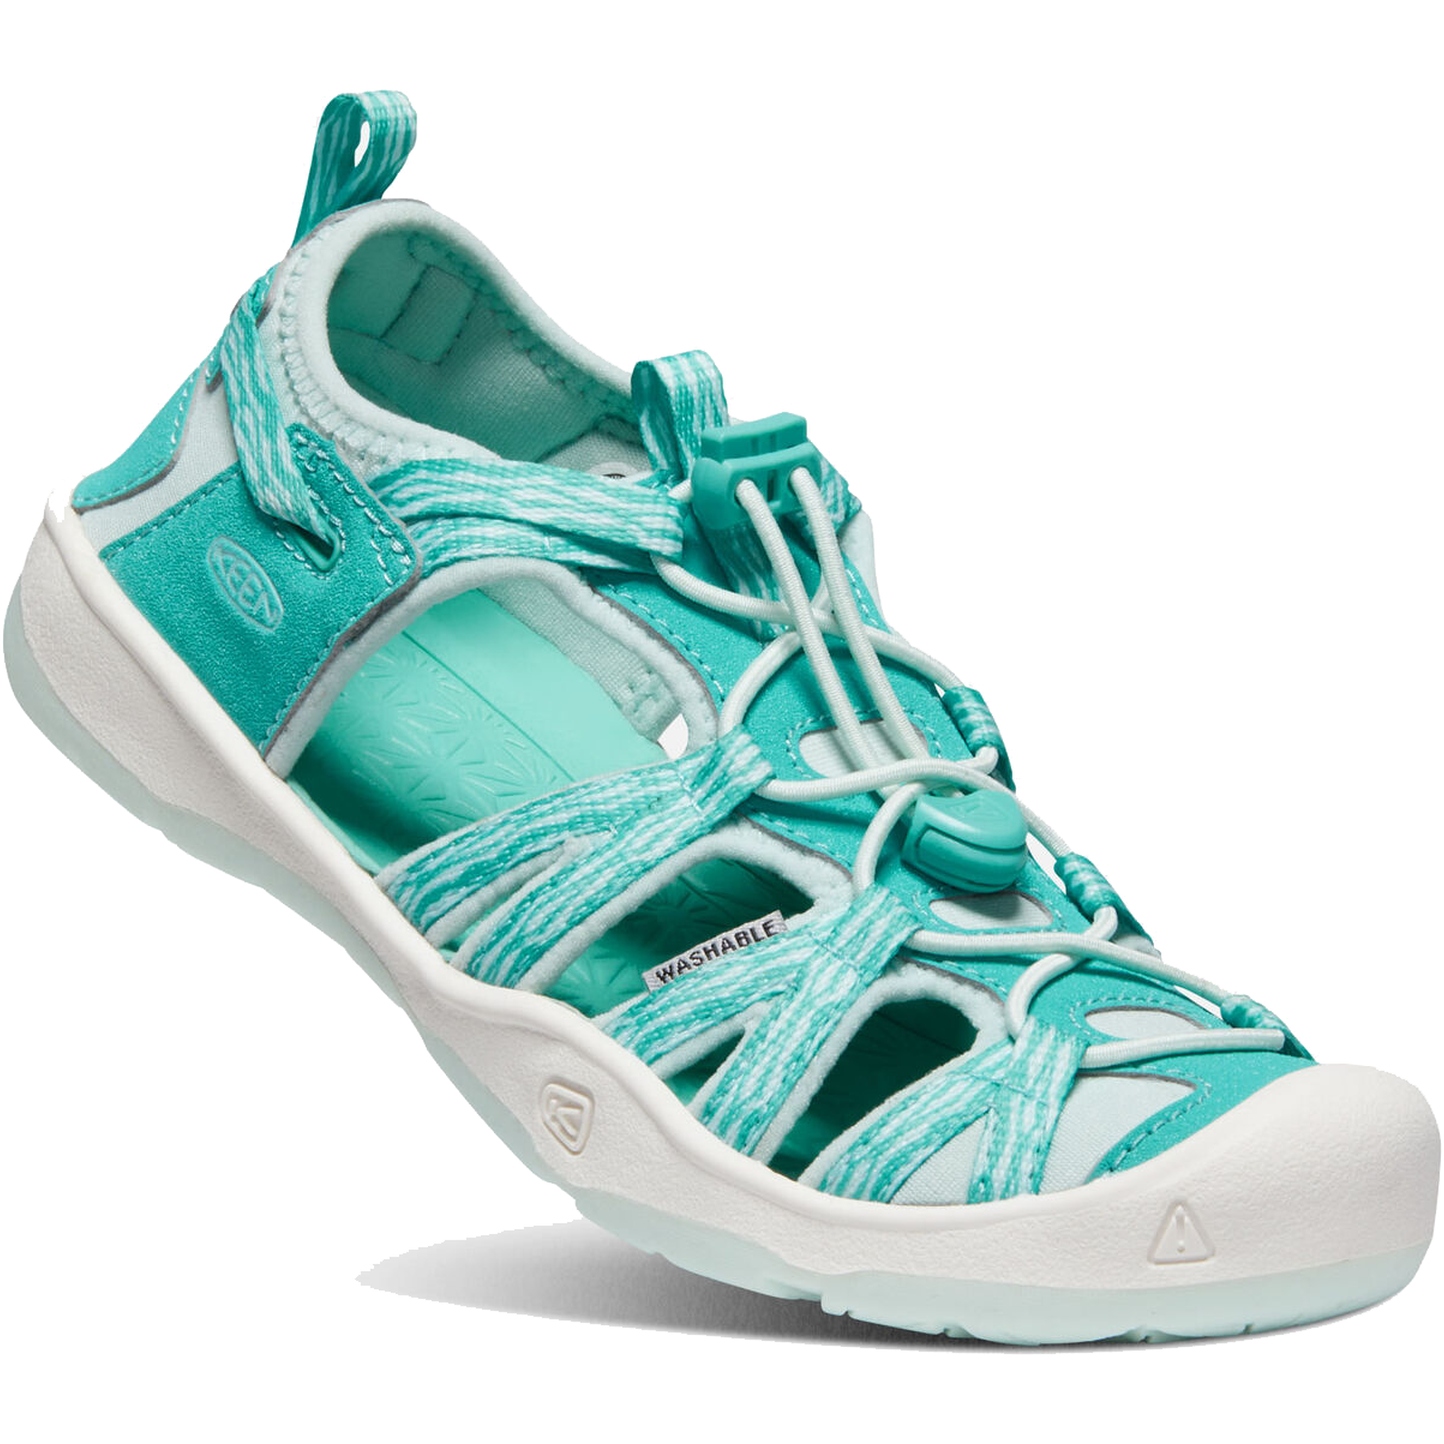 Image of KEEN Moxie Kids Sandals - Waterfall / Blue Glass (Size 32-38)